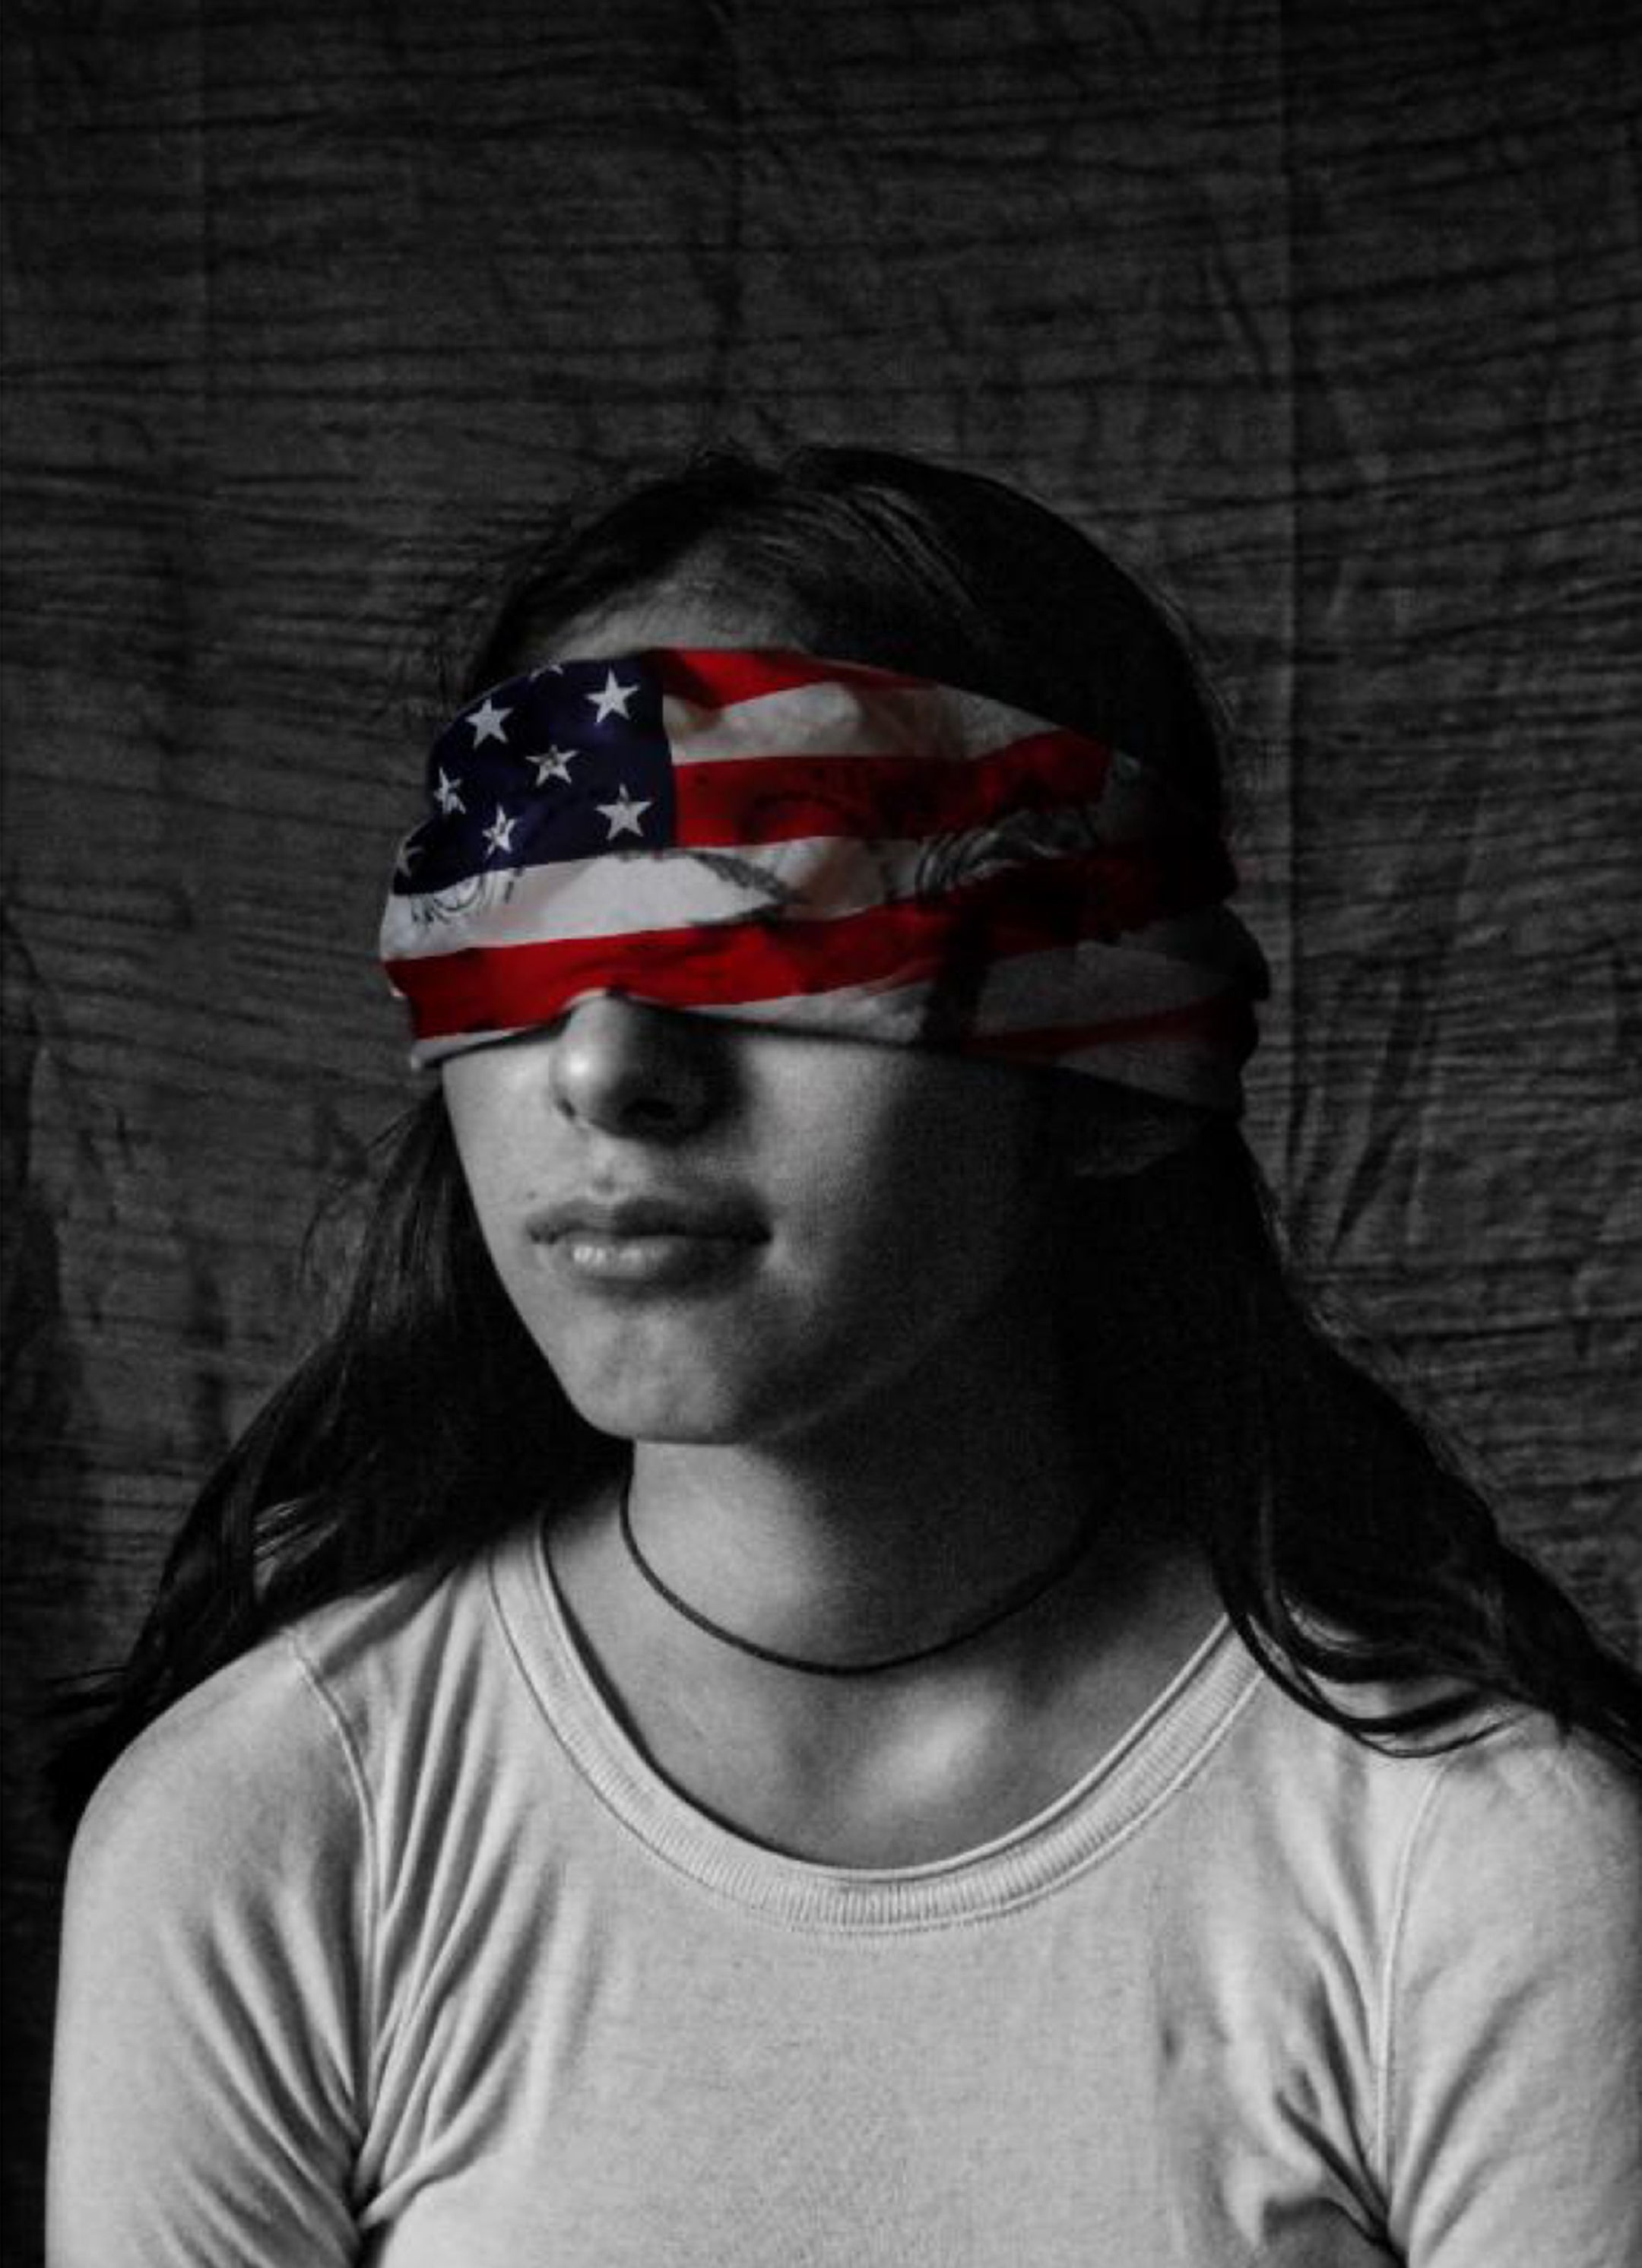 Black and white photo illustration of a young person wearing an American flag blindfold